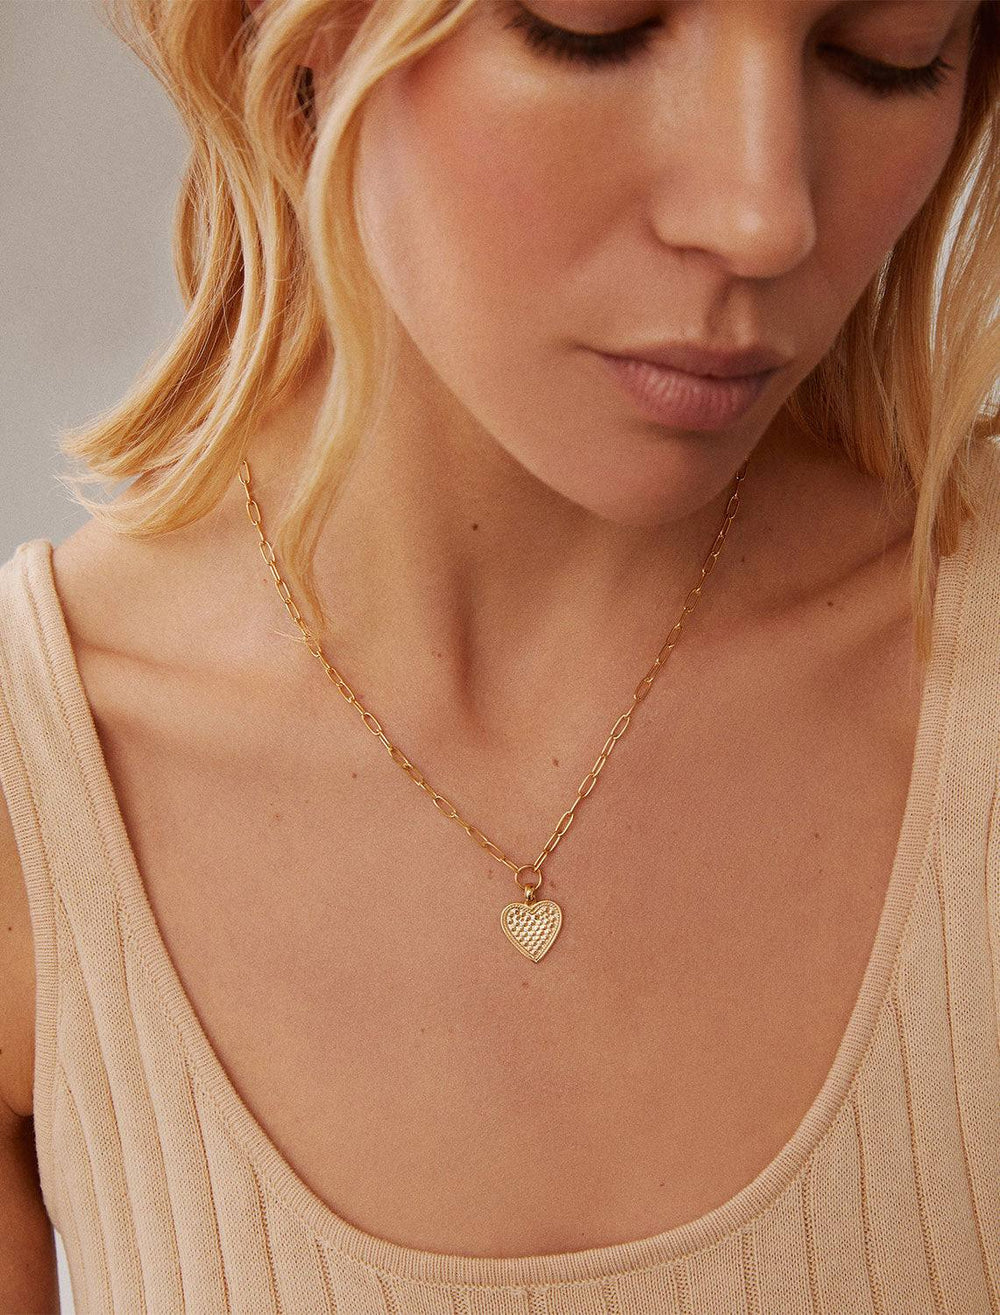 Model wearing Anna Beck's medium heart engravable necklace in gold.